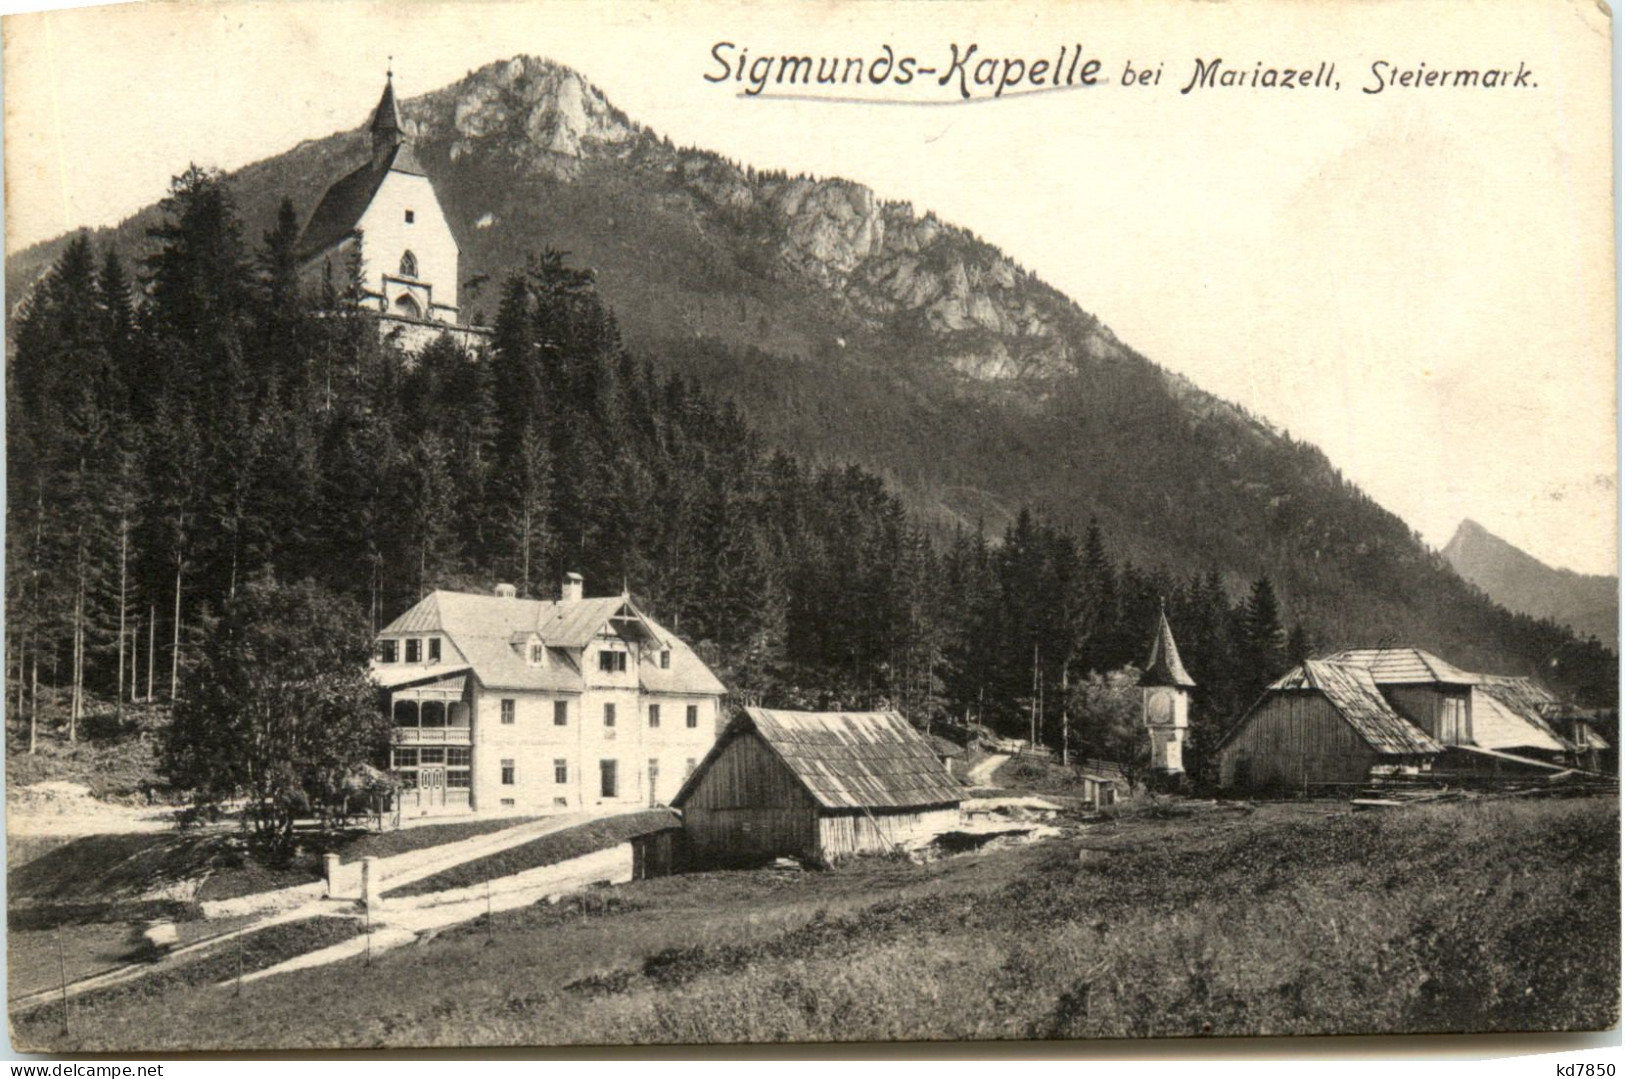 Mariazell, Sigmunds-Kapelle - Mariazell